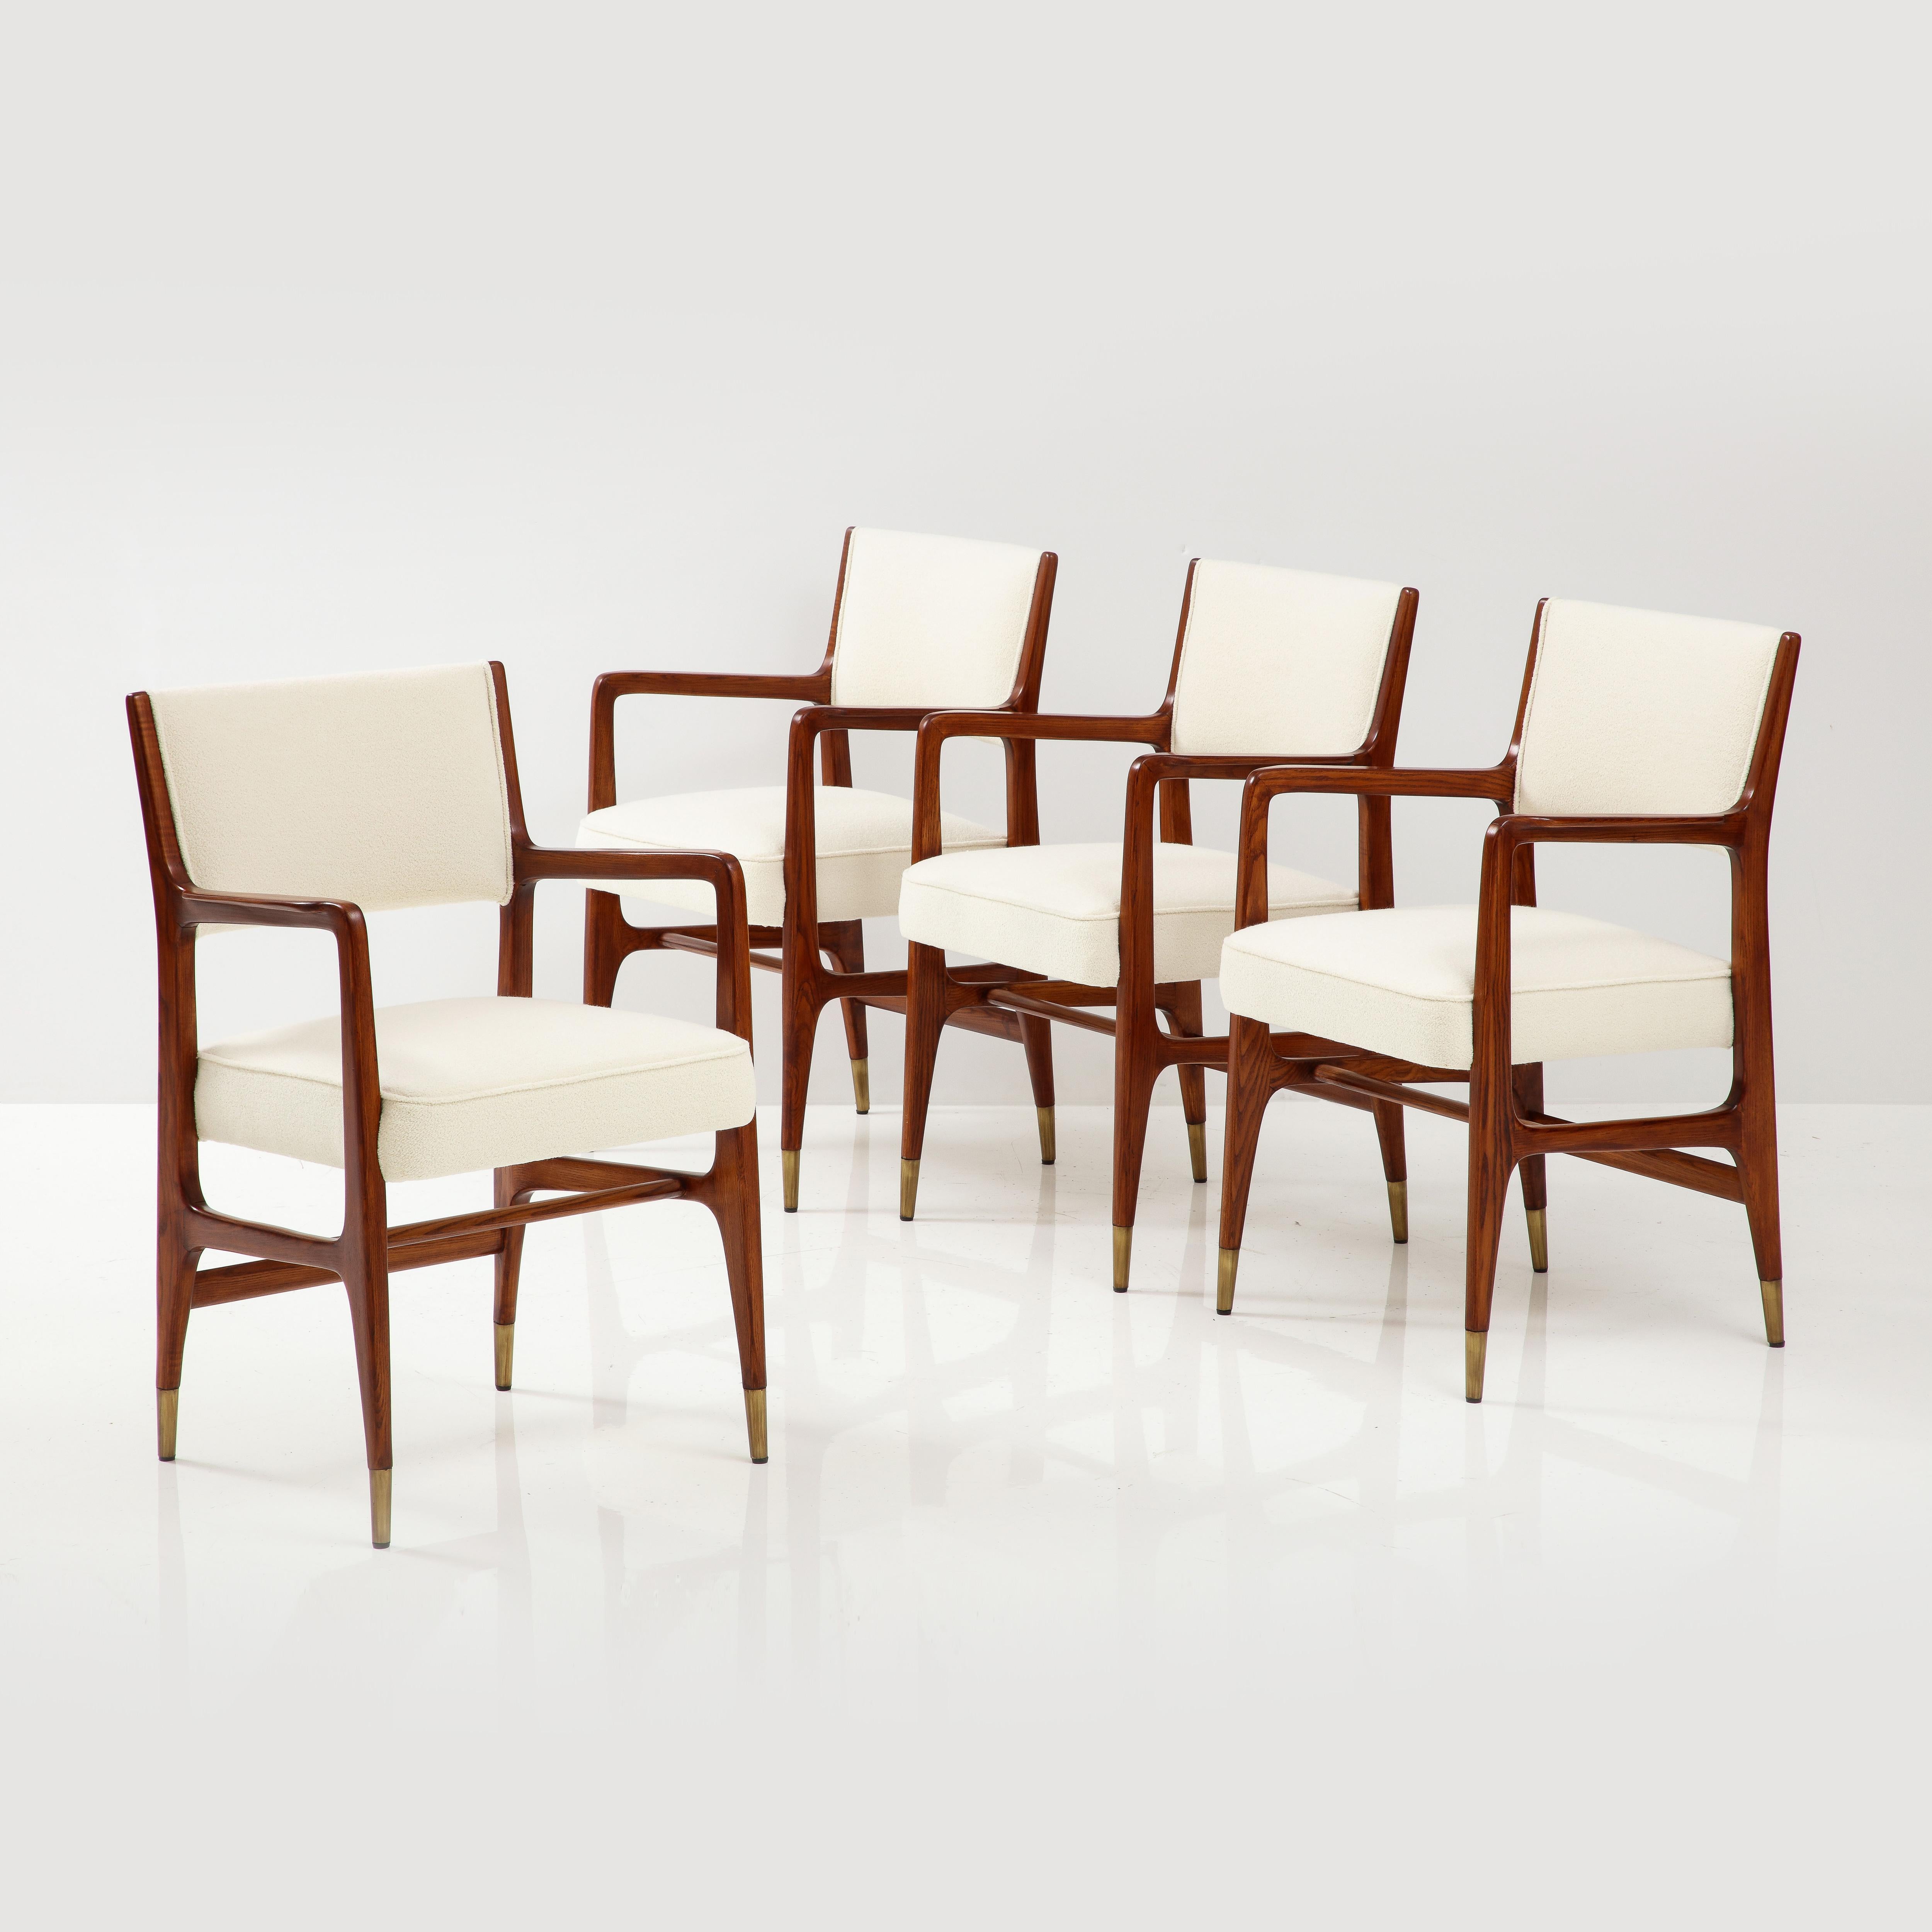 Gio Ponti for Cassina rare set of 4 dining chairs model 110 with white oak frames, upholstered seat and back in ivory bouclé, and ending in brass sabots, Italy, 1950s. These Ponti classic architectural armchairs have sculptural curved armrests,